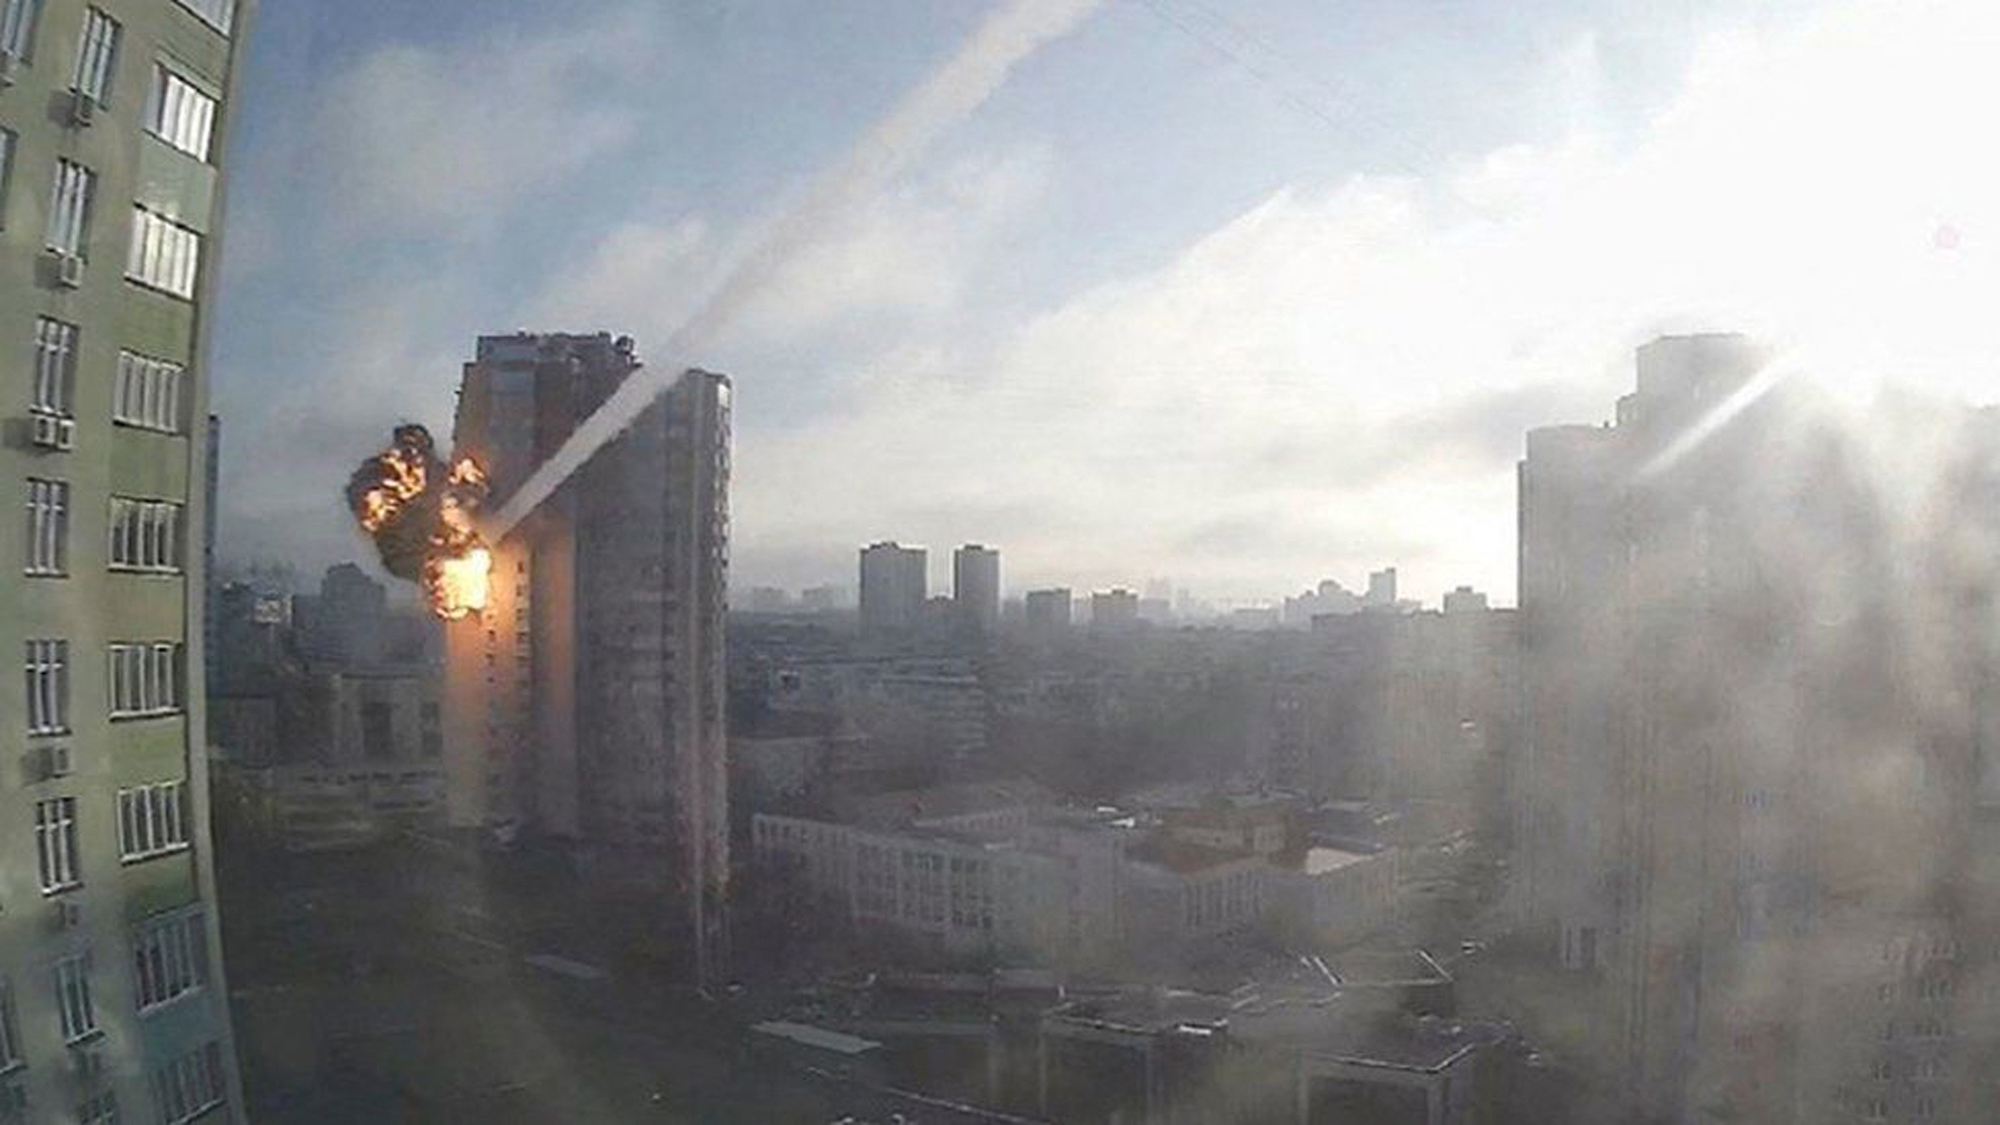 Image grab from a CCTV footage which captures Russia missile struck a high-rise apartment block overnight in Kyiv, capital of Ukraine, on Saturday Feb 26, 2022 as fighting rages between Russian and Ukrainian forces.